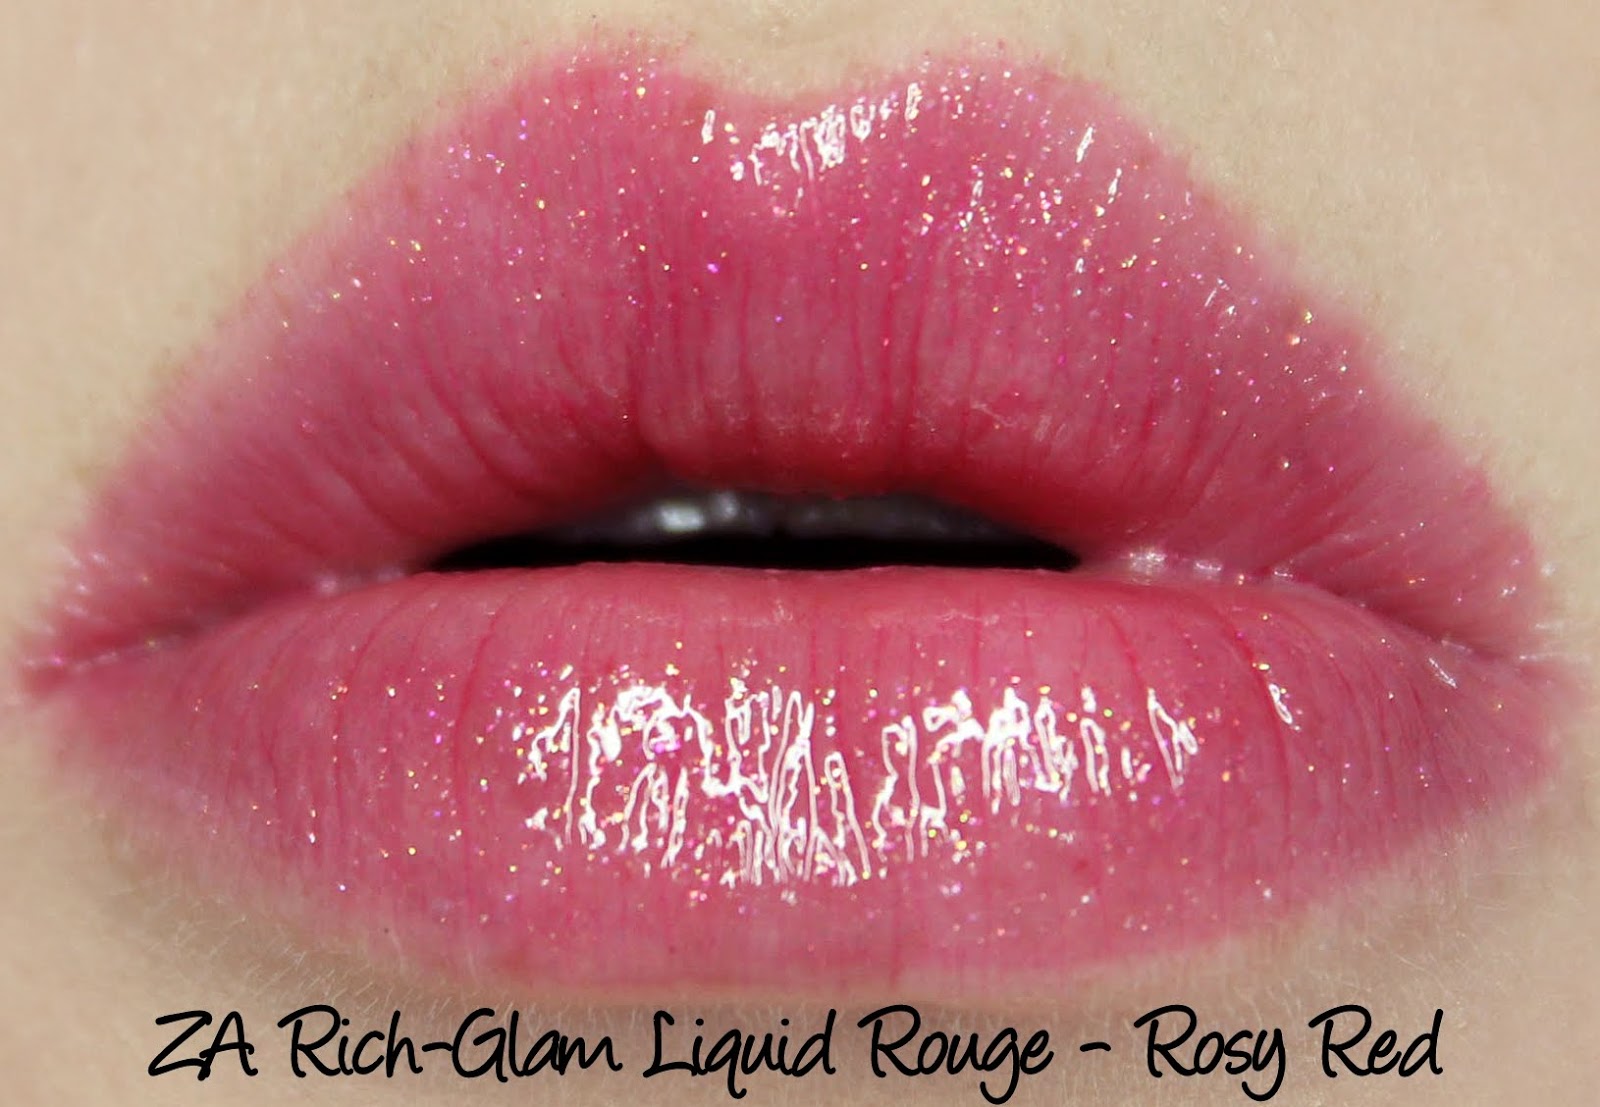 ZA Rich-Glam Liquid Rouge Limited Edition - Rosy Red swatches & review